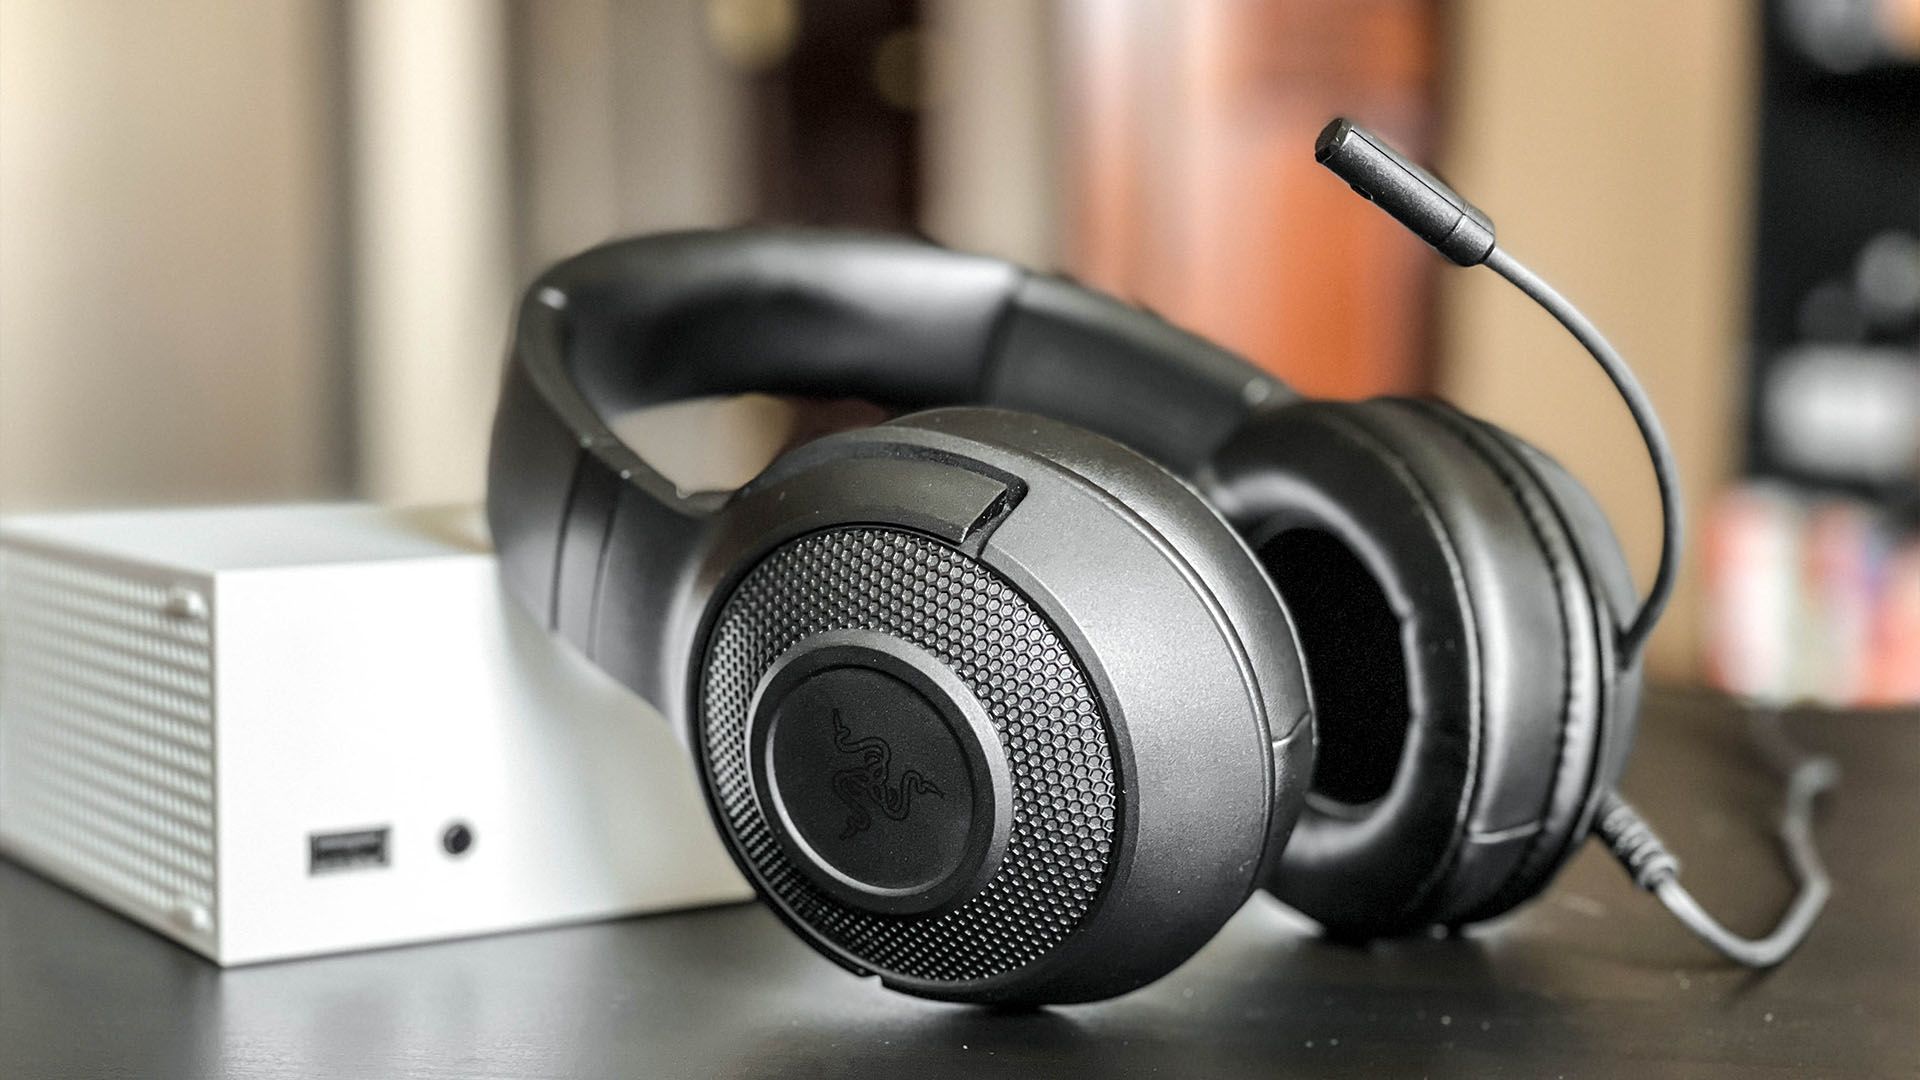 Best wired gaming headset 2023